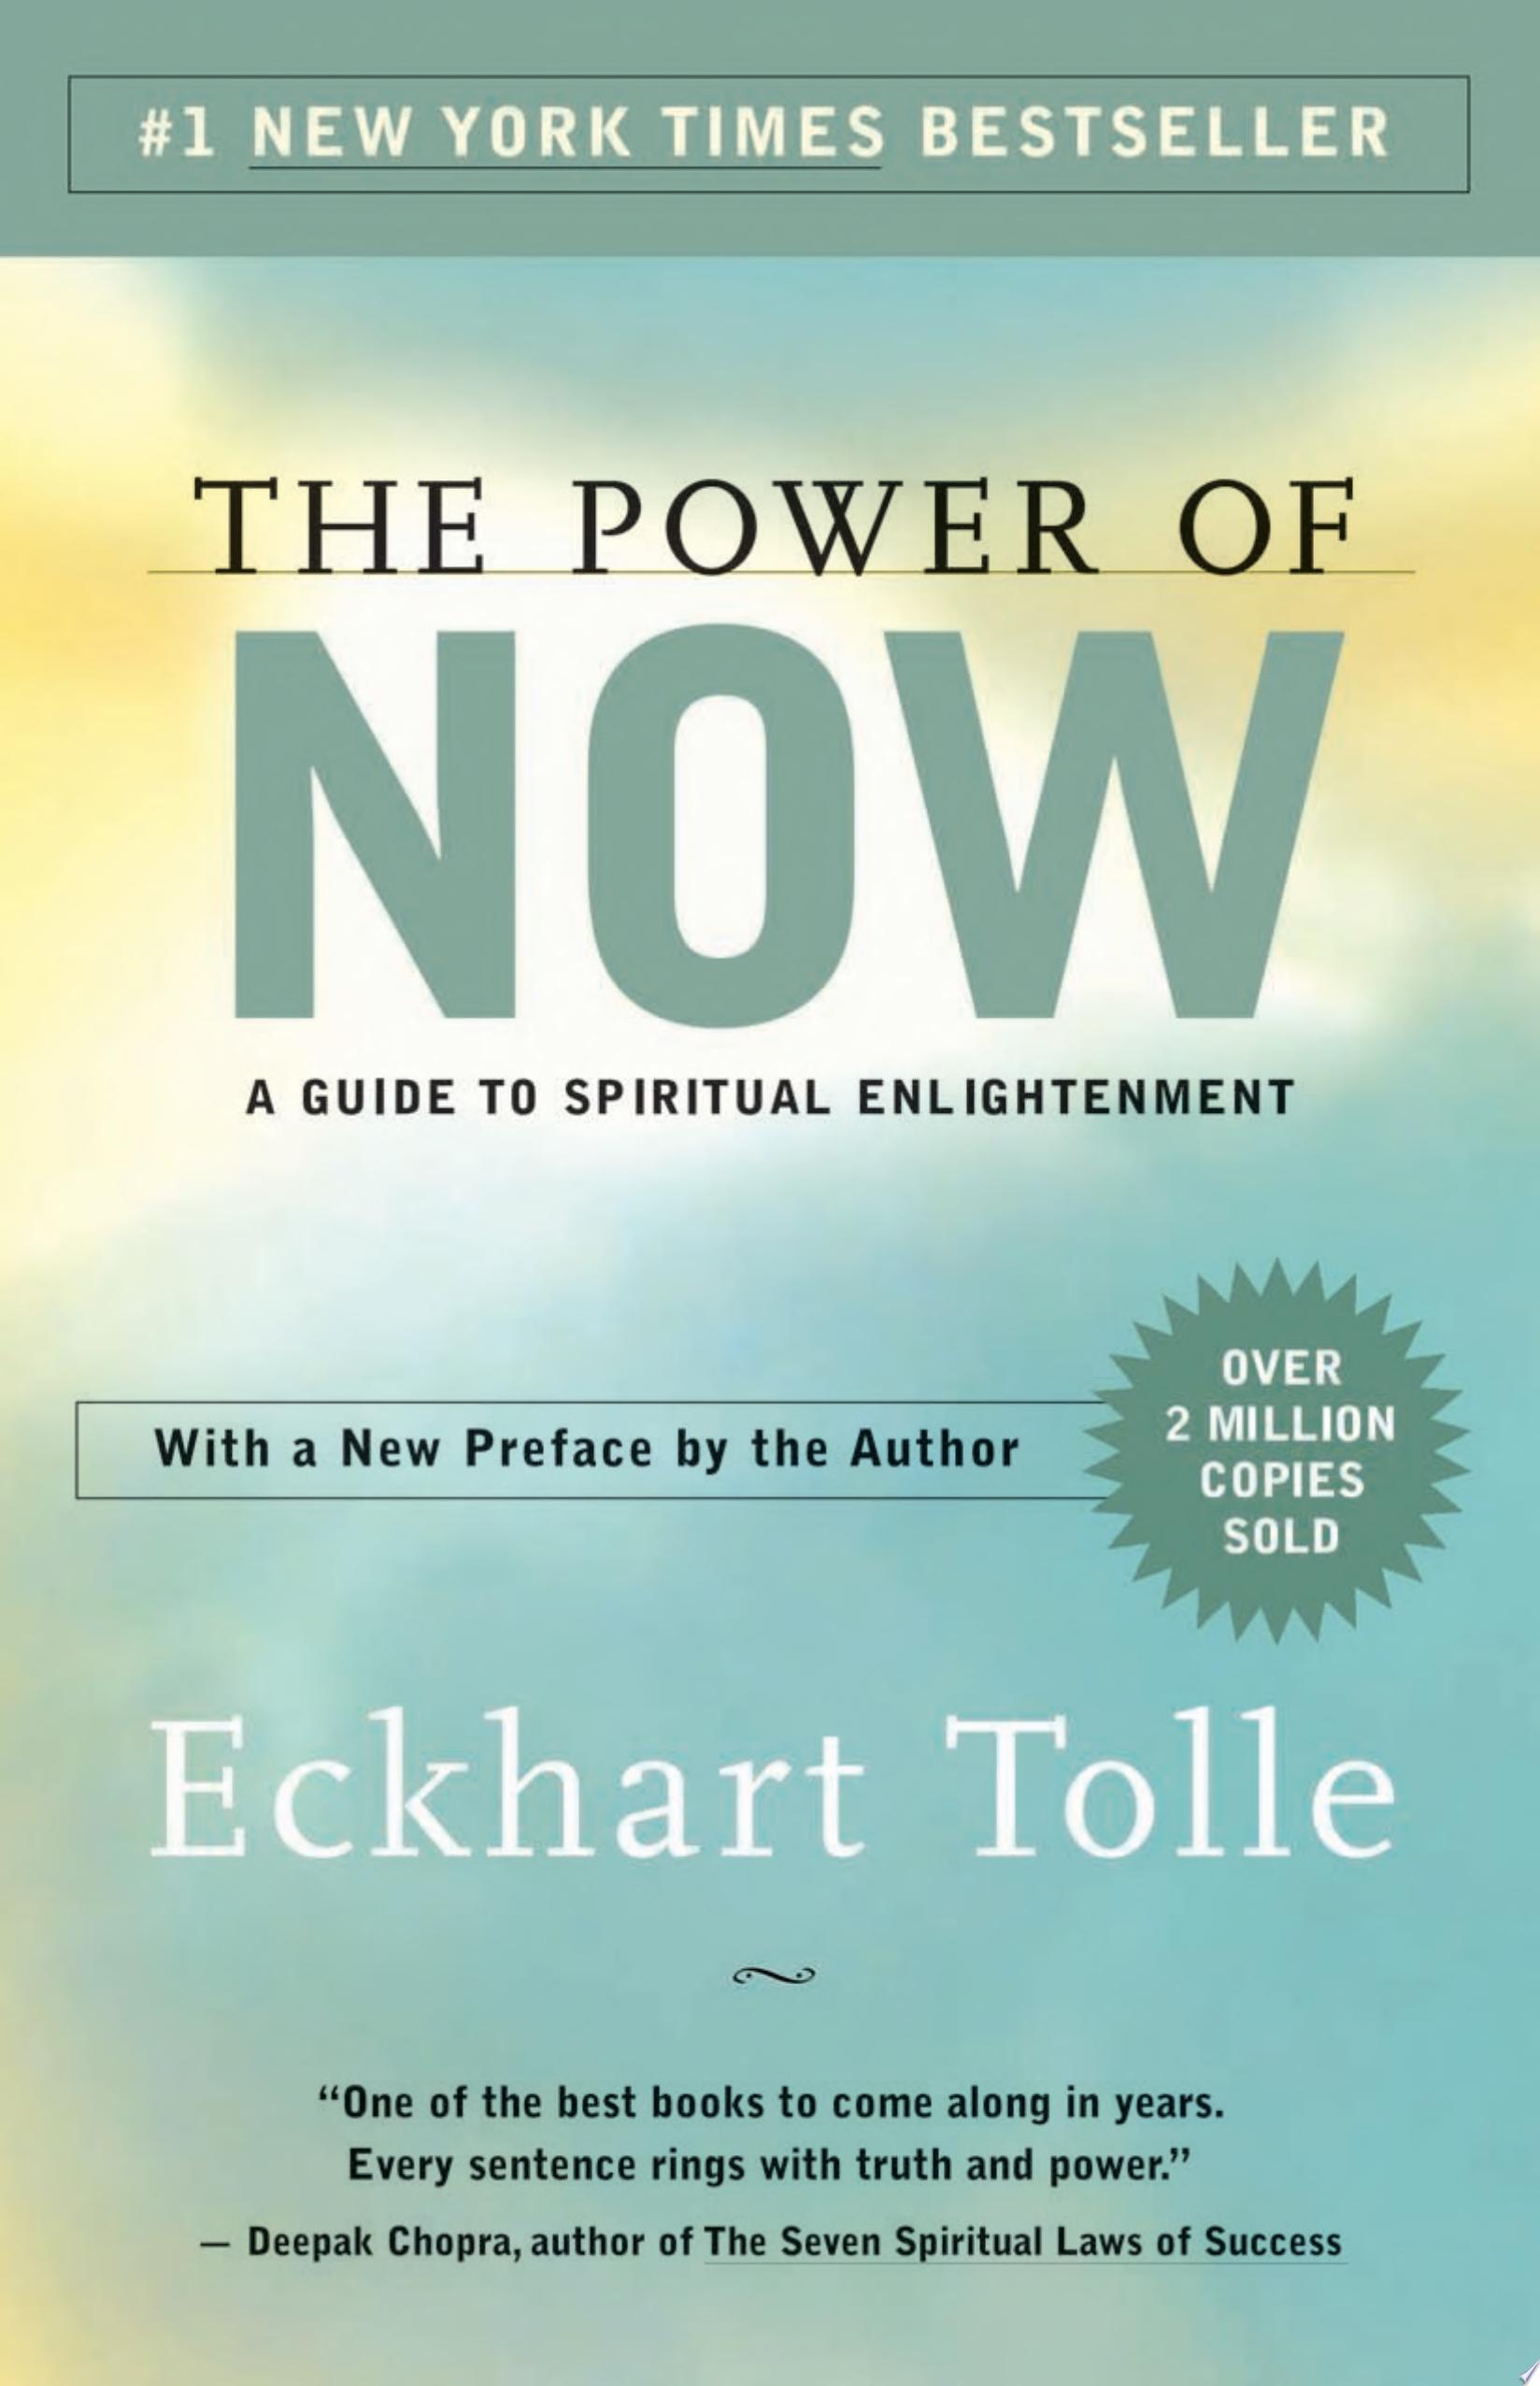 Image for "The Power of Now"